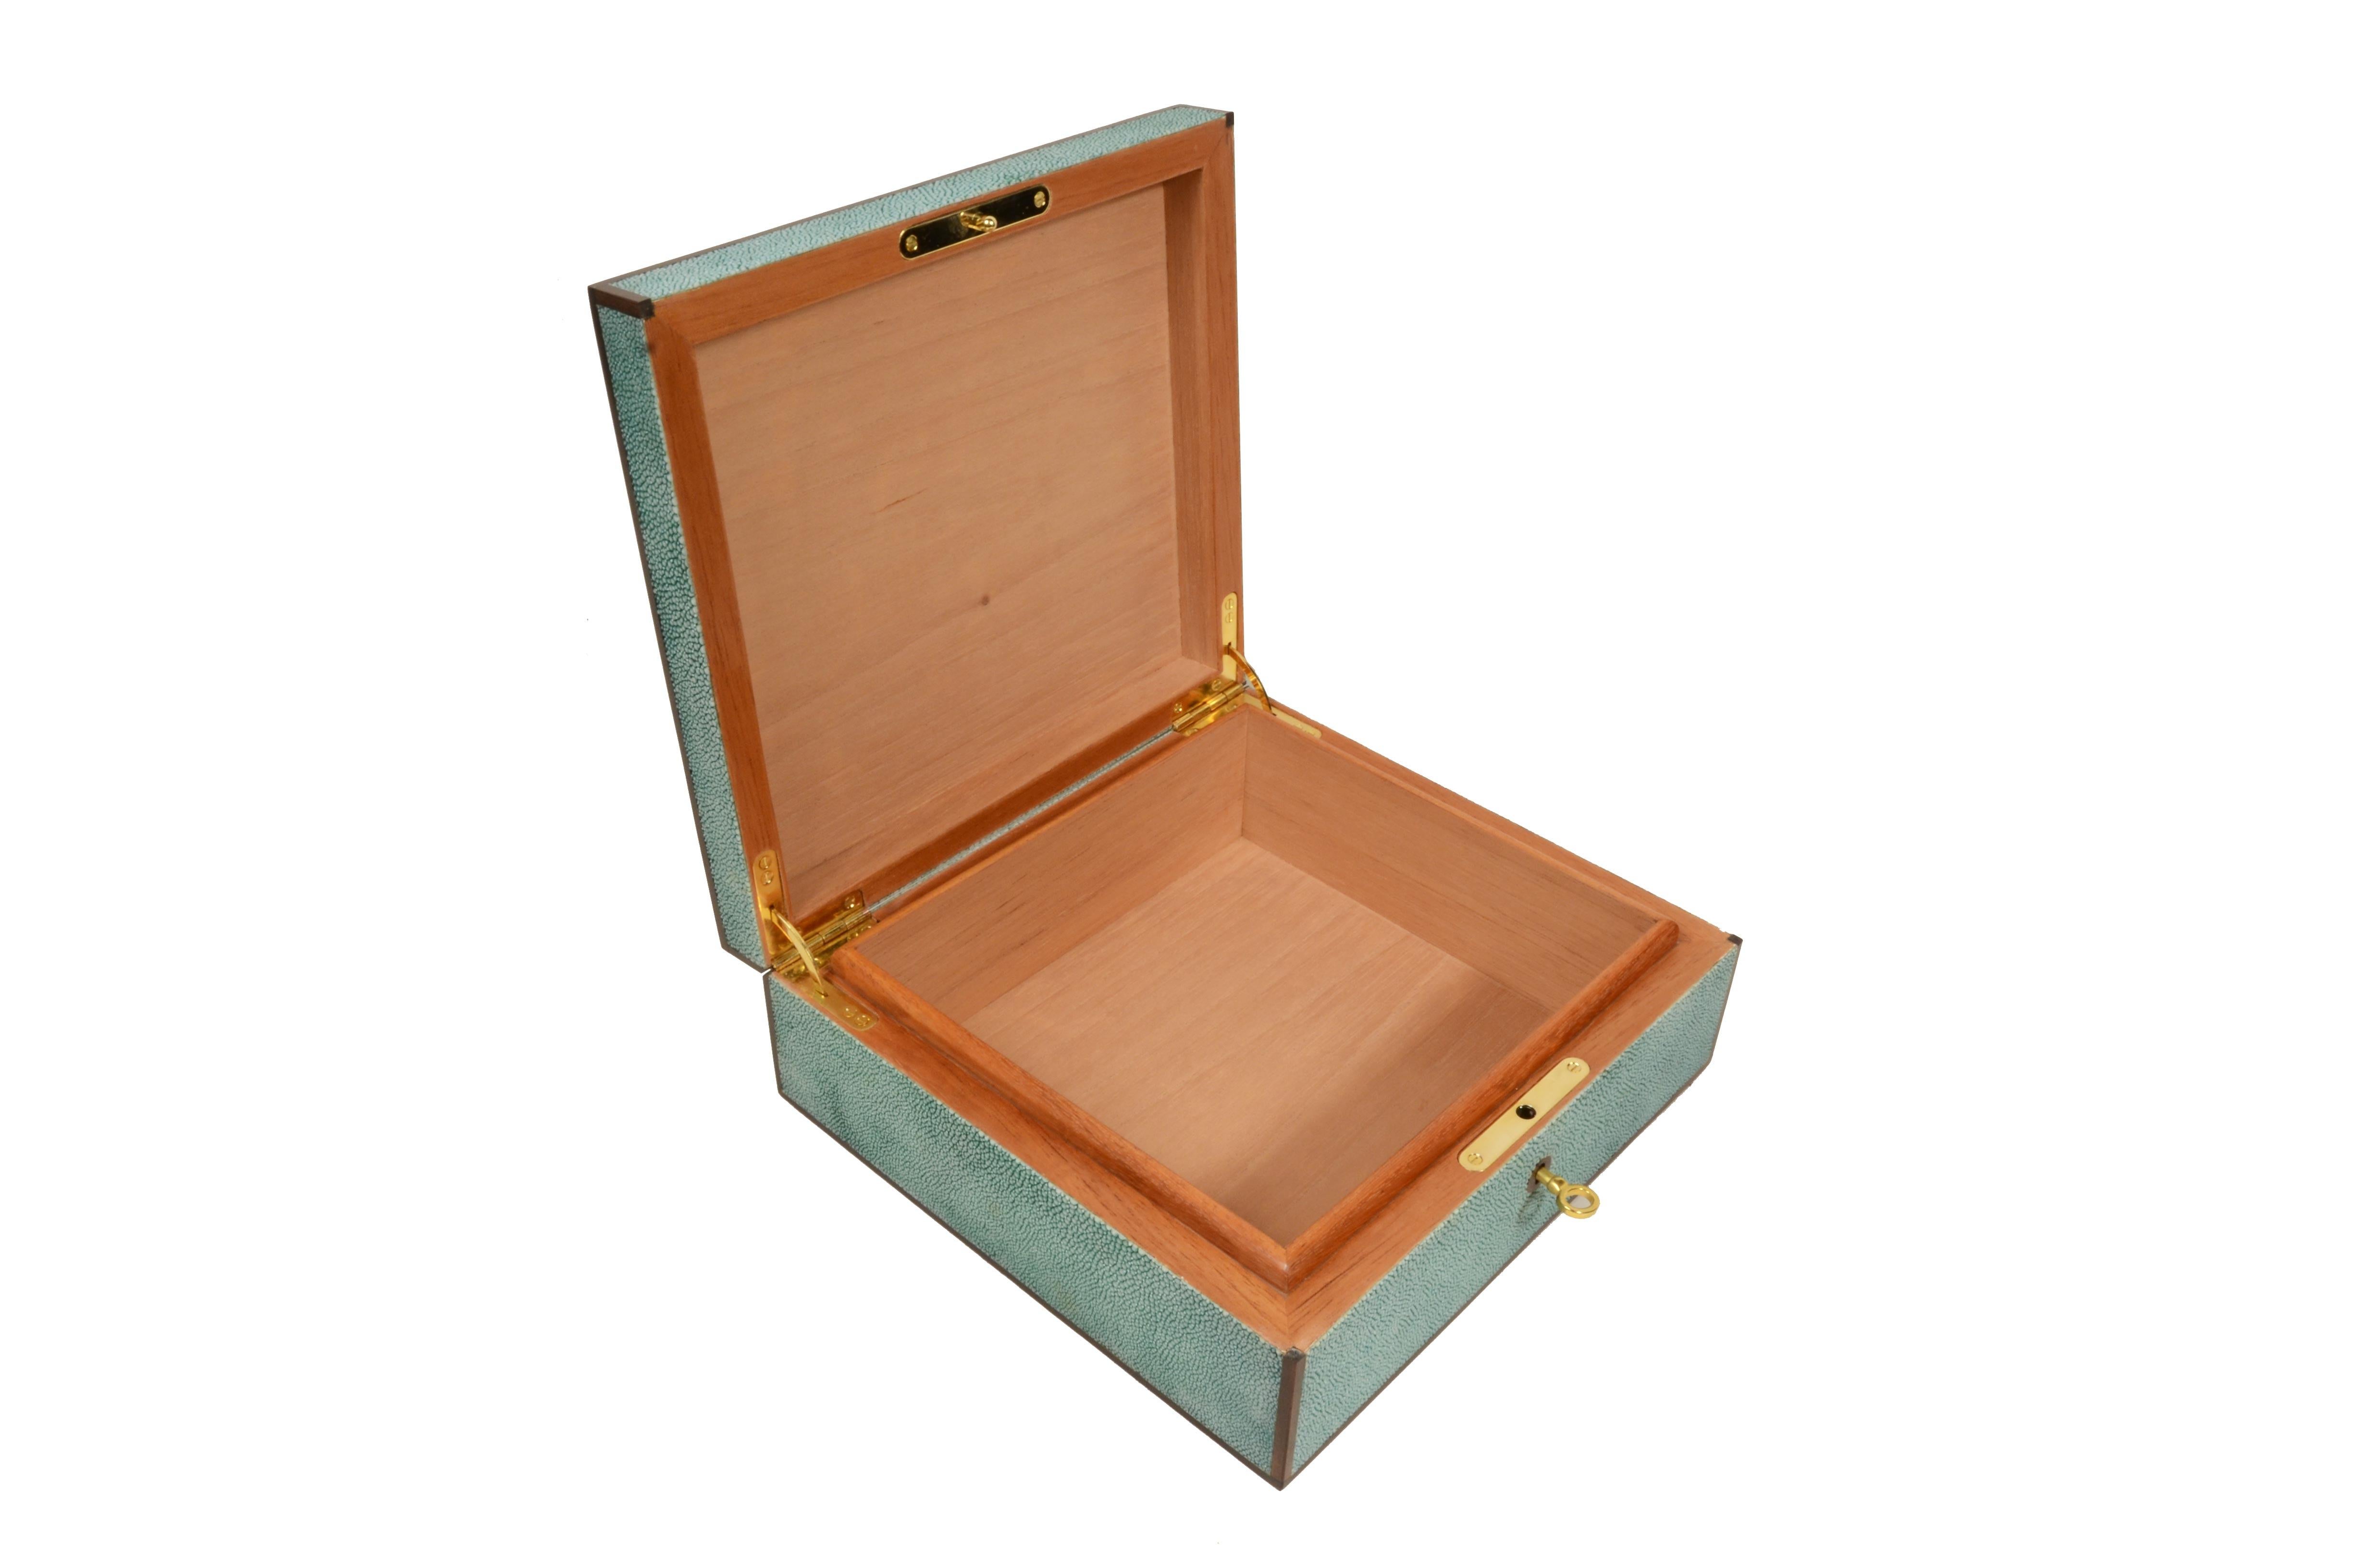 Precious cigar box set  galuchat-coated teak wood with ebony profiles, 1970s manufacture.
Wooden teak base with slightly raised lid in the shape of a truncated pyramid  and masterfully veneered in Galuchat, purebred leather  emerald green tint with